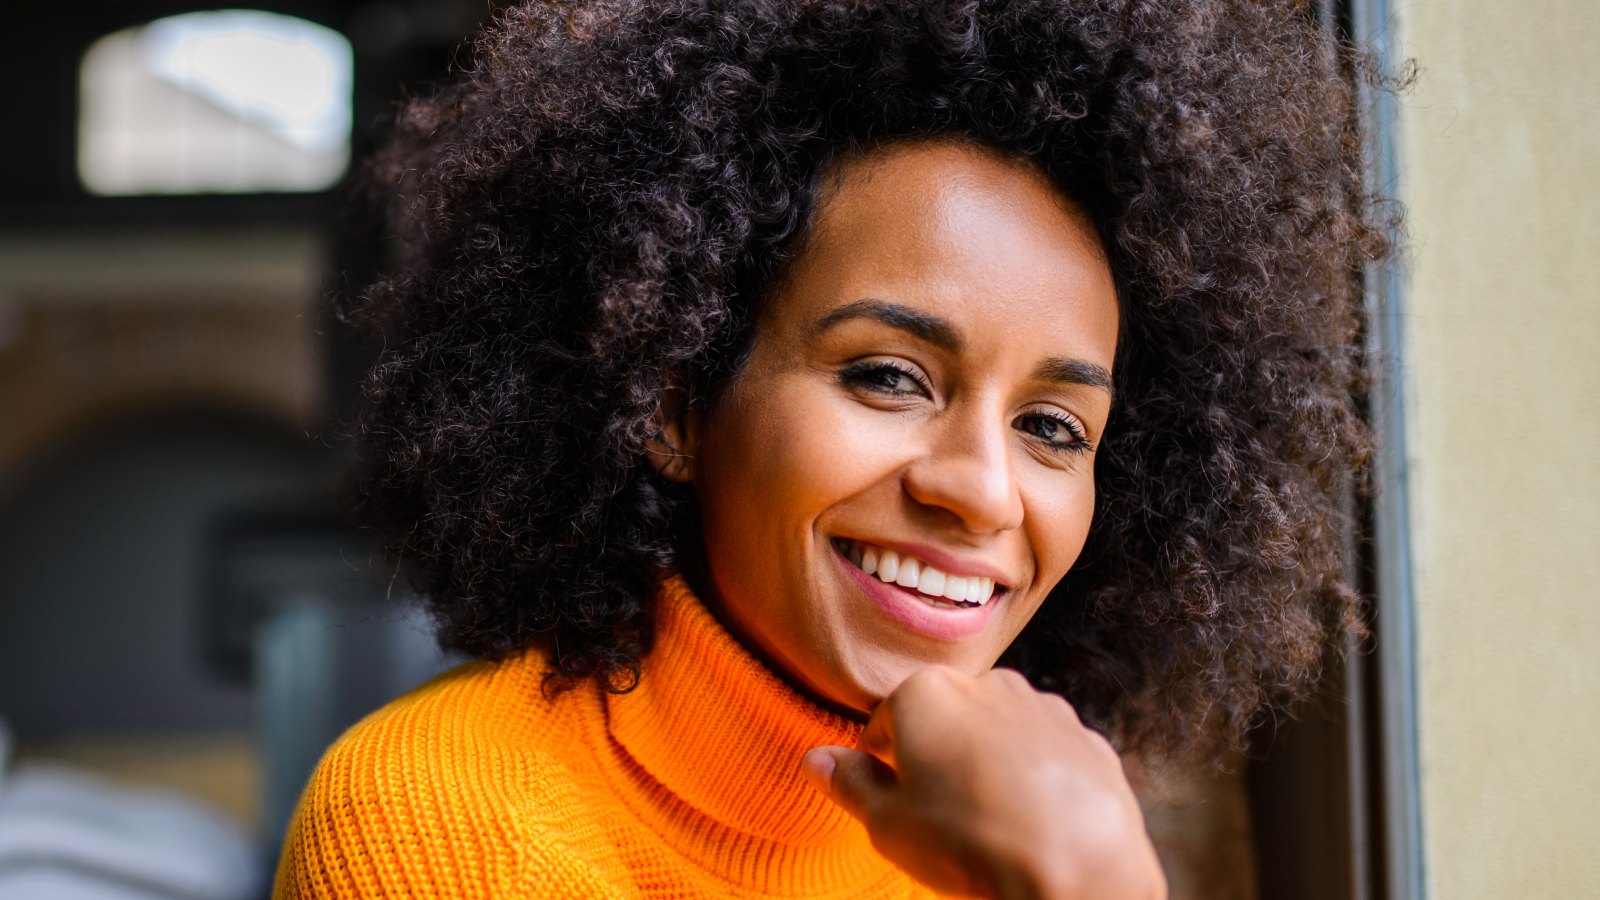 woman with big curly hair smiling while sitting down wearing a bright orange sweater